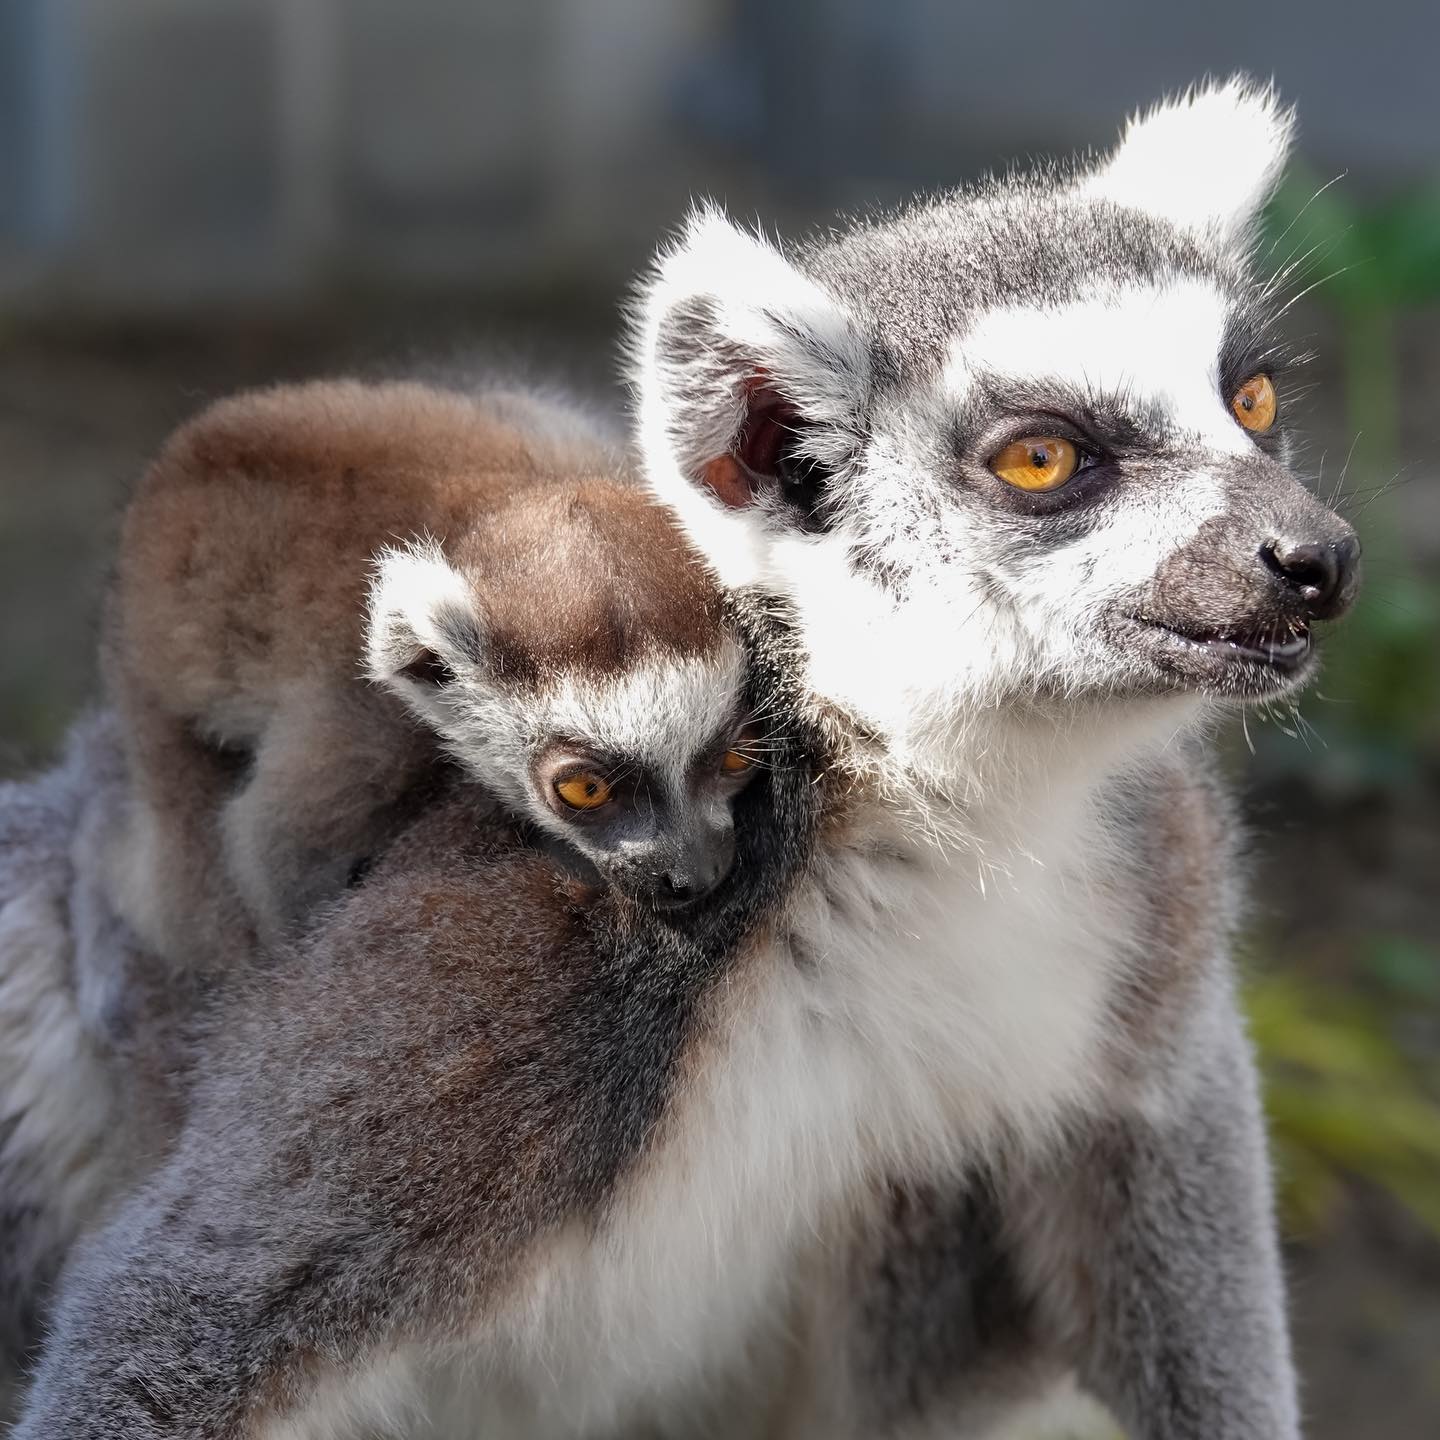 Africa, Madagascar, Isalo National Park Ring-tailed lemur grooms another lemur's  tail Poster Print by Ellen Goff (24 x 18) # AF24EGO0164 - Posterazzi